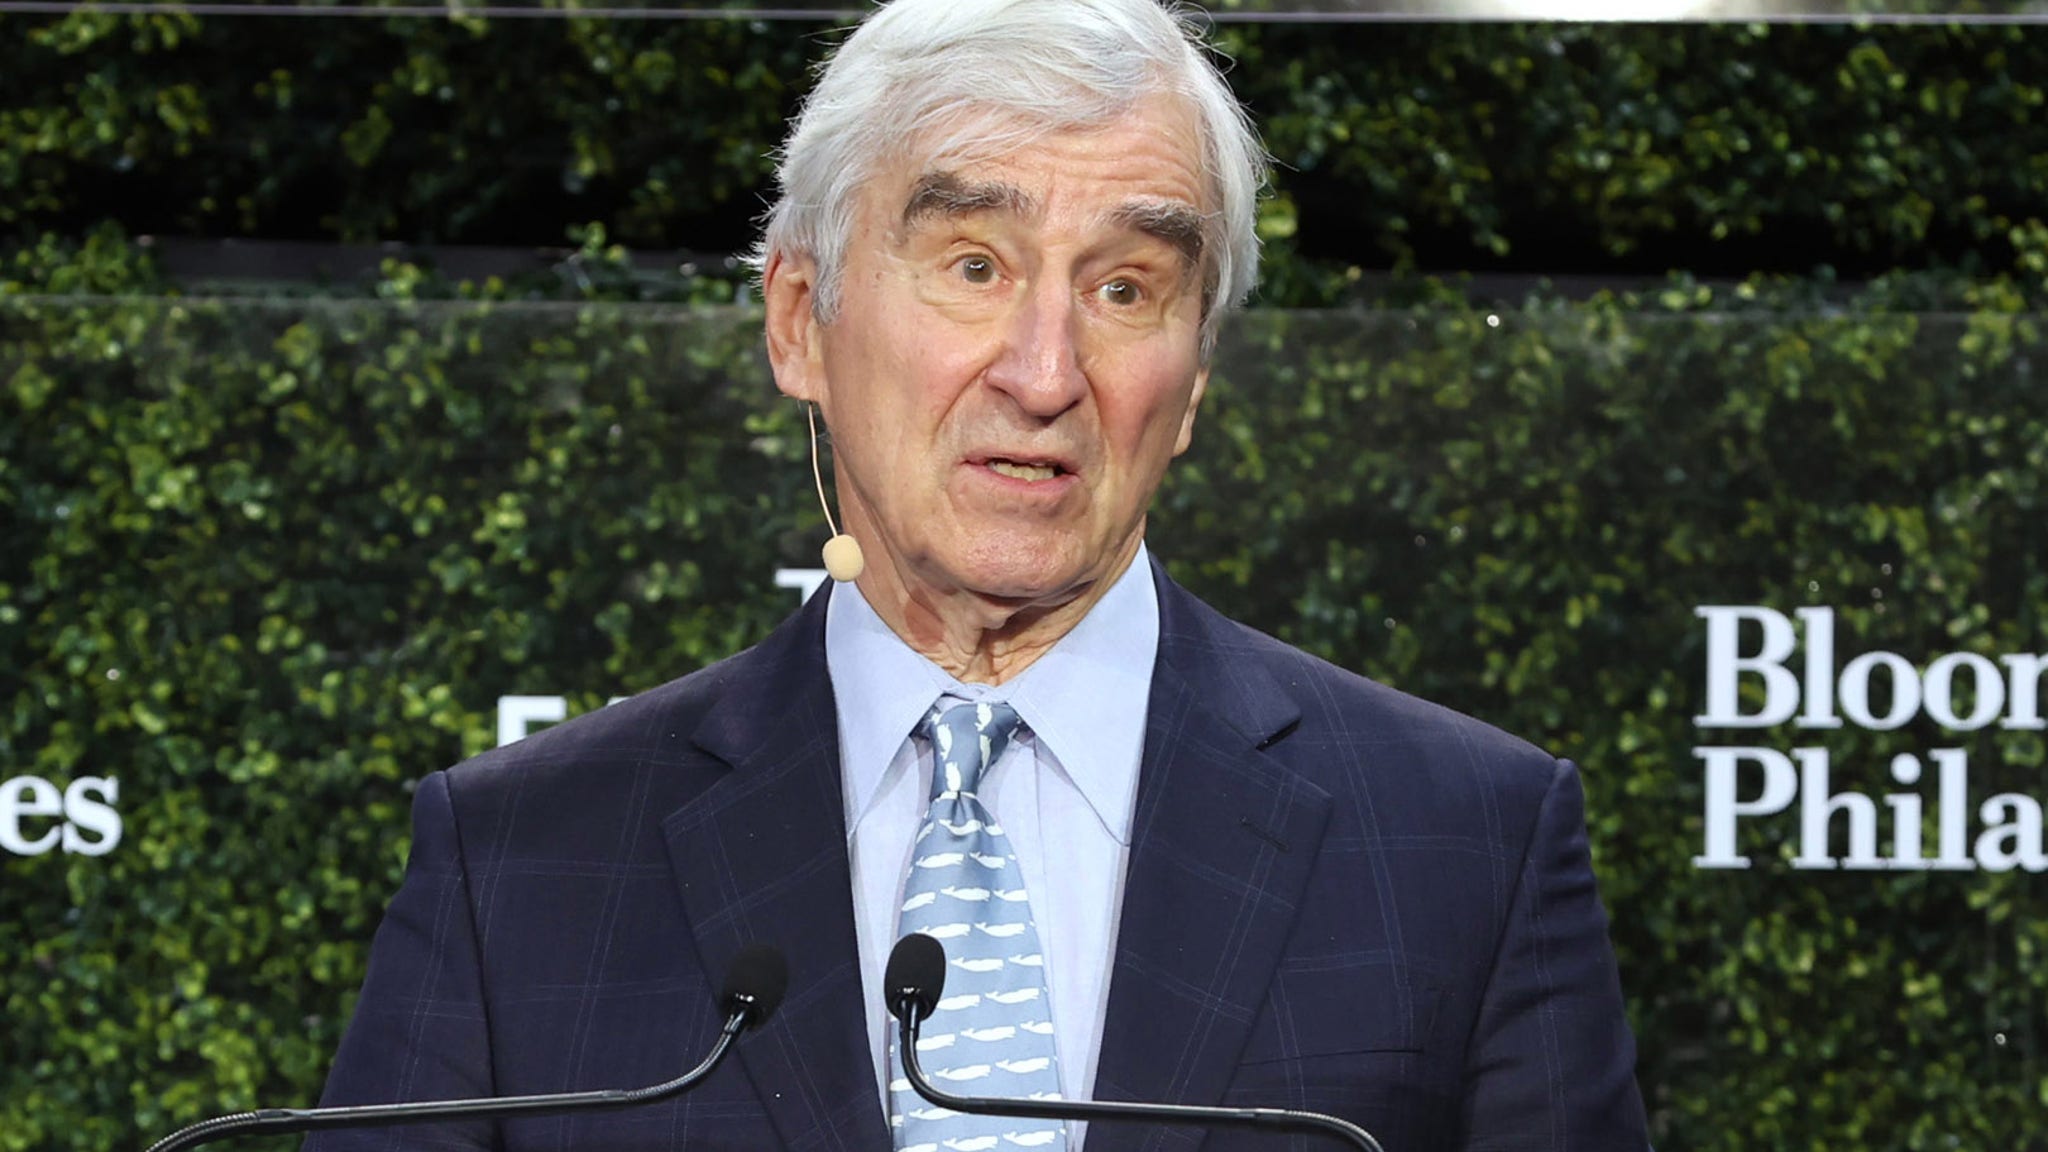 How Sam Waterston Wrapped His Final Episode As Law & Order's Jack McCoy